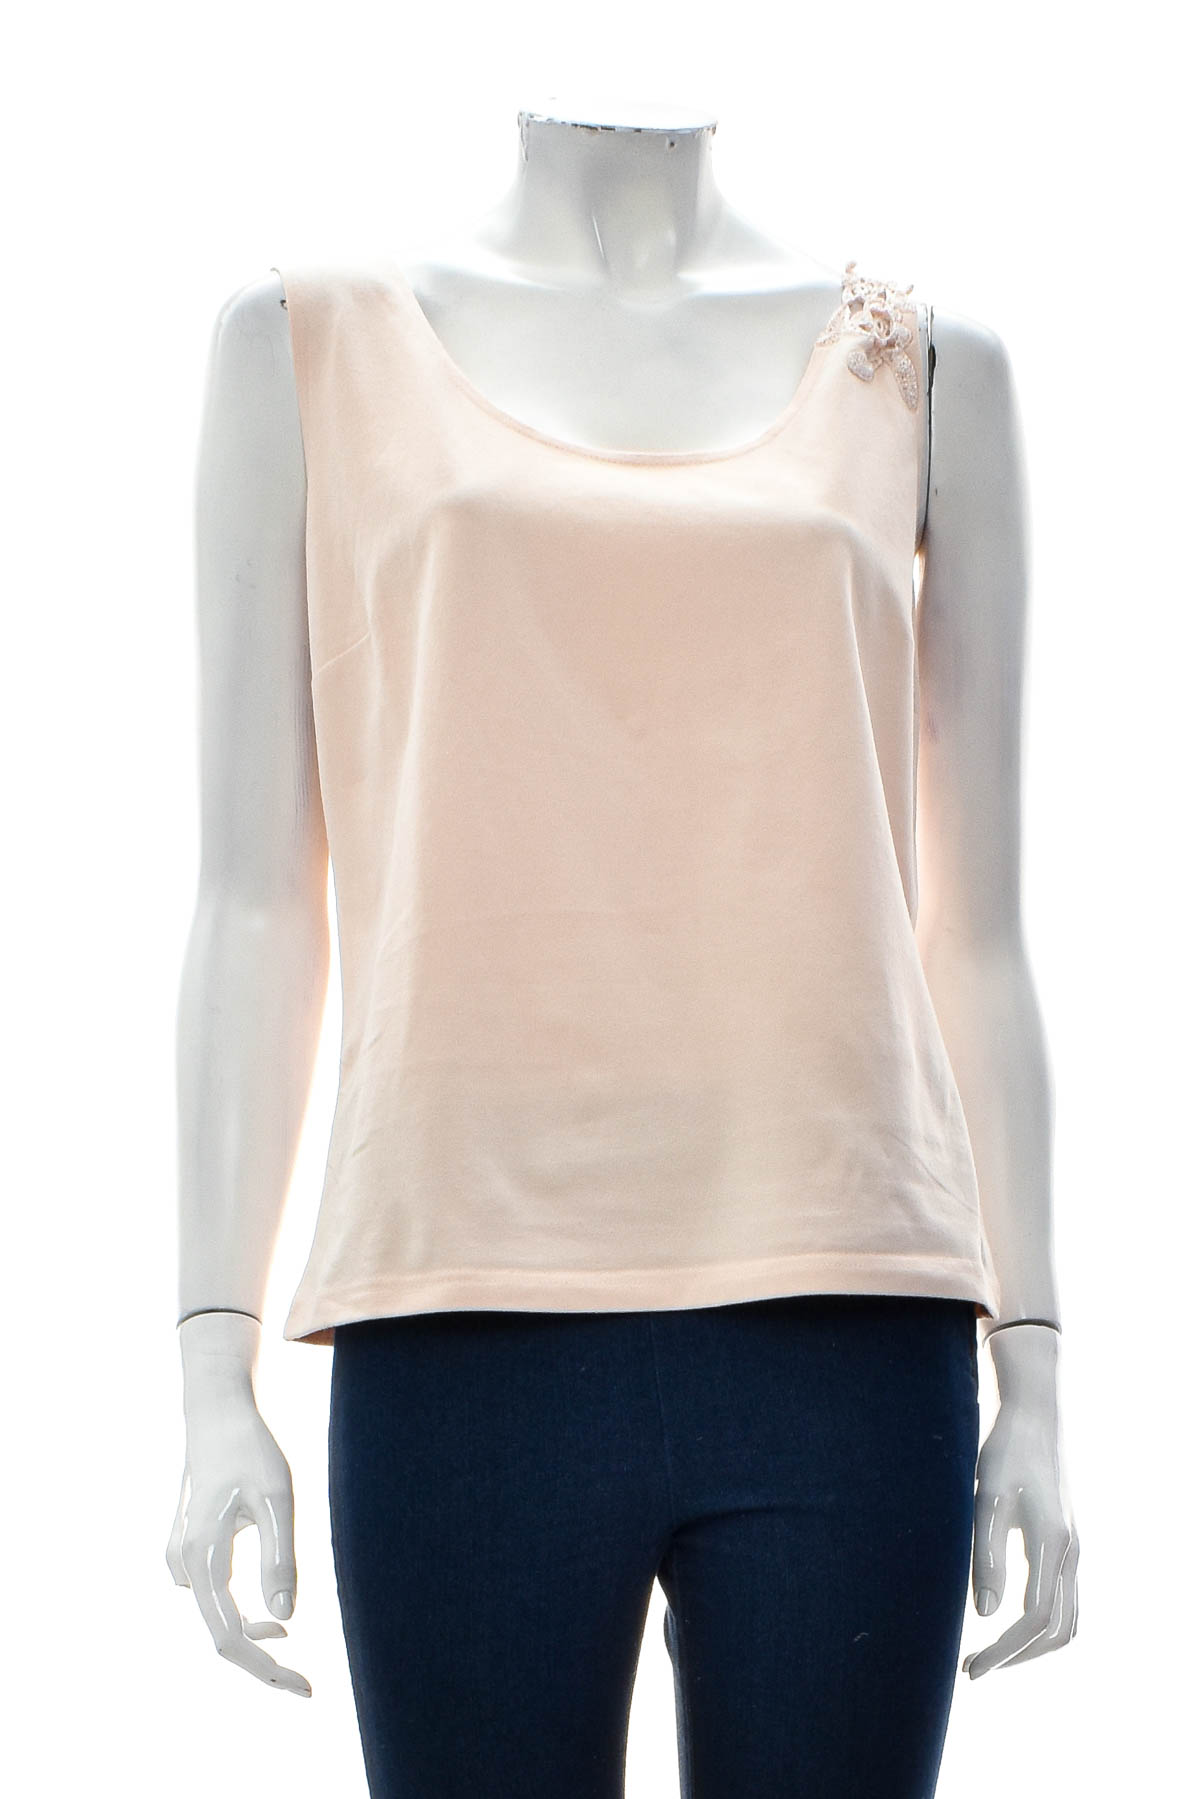 Women's top - Together - 0